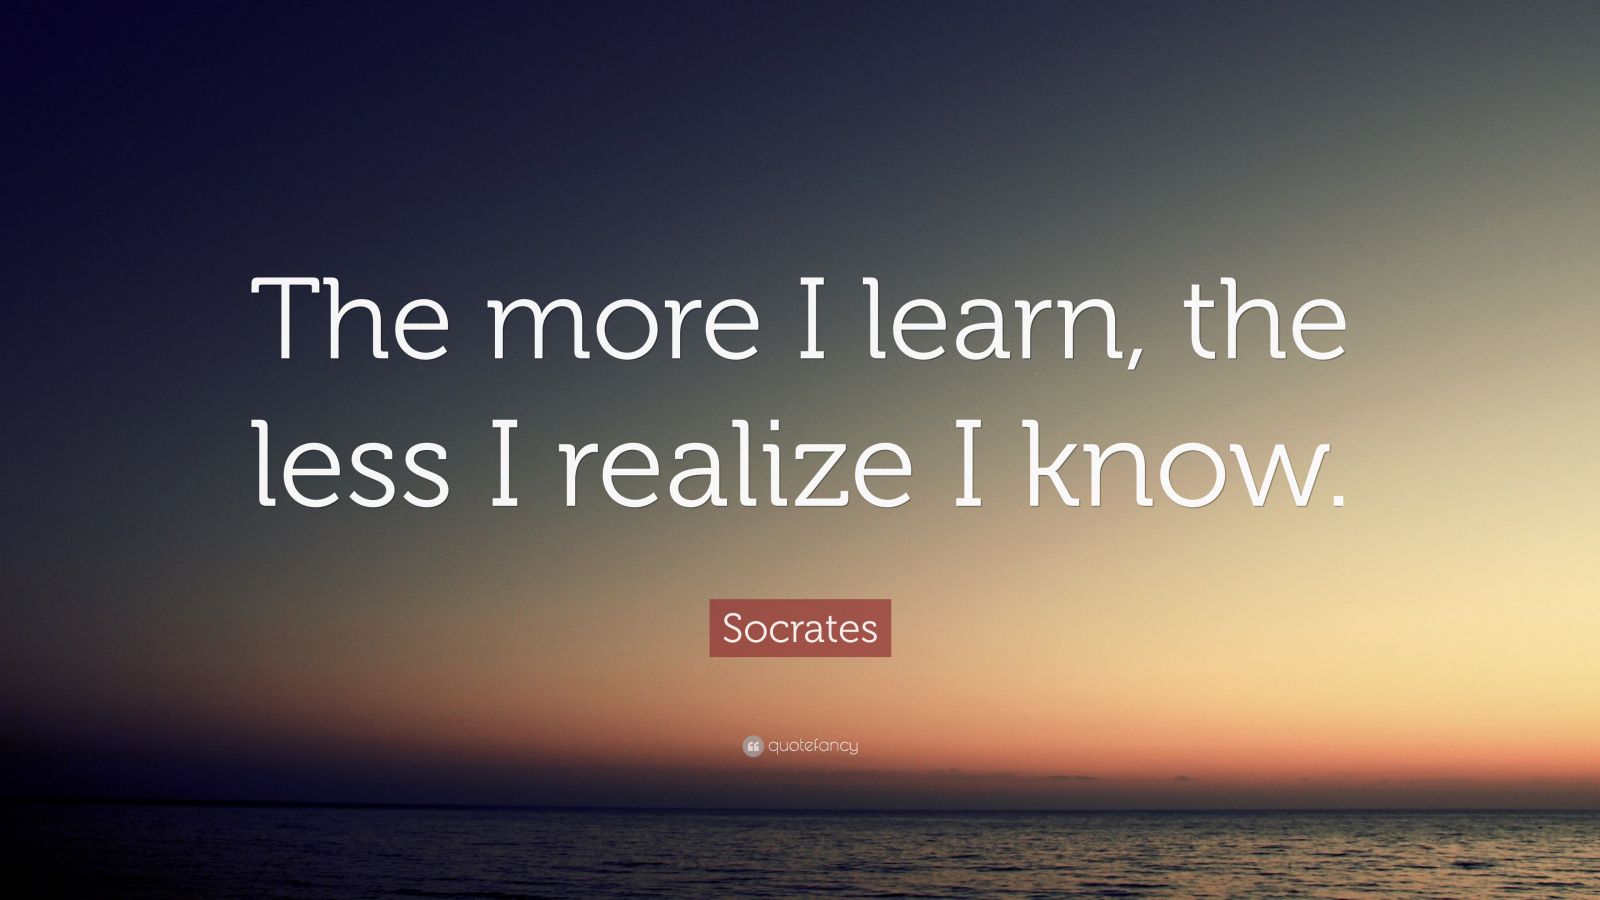 Socrates Quote: “The more I learn, the less I realize I know.” (11 ...